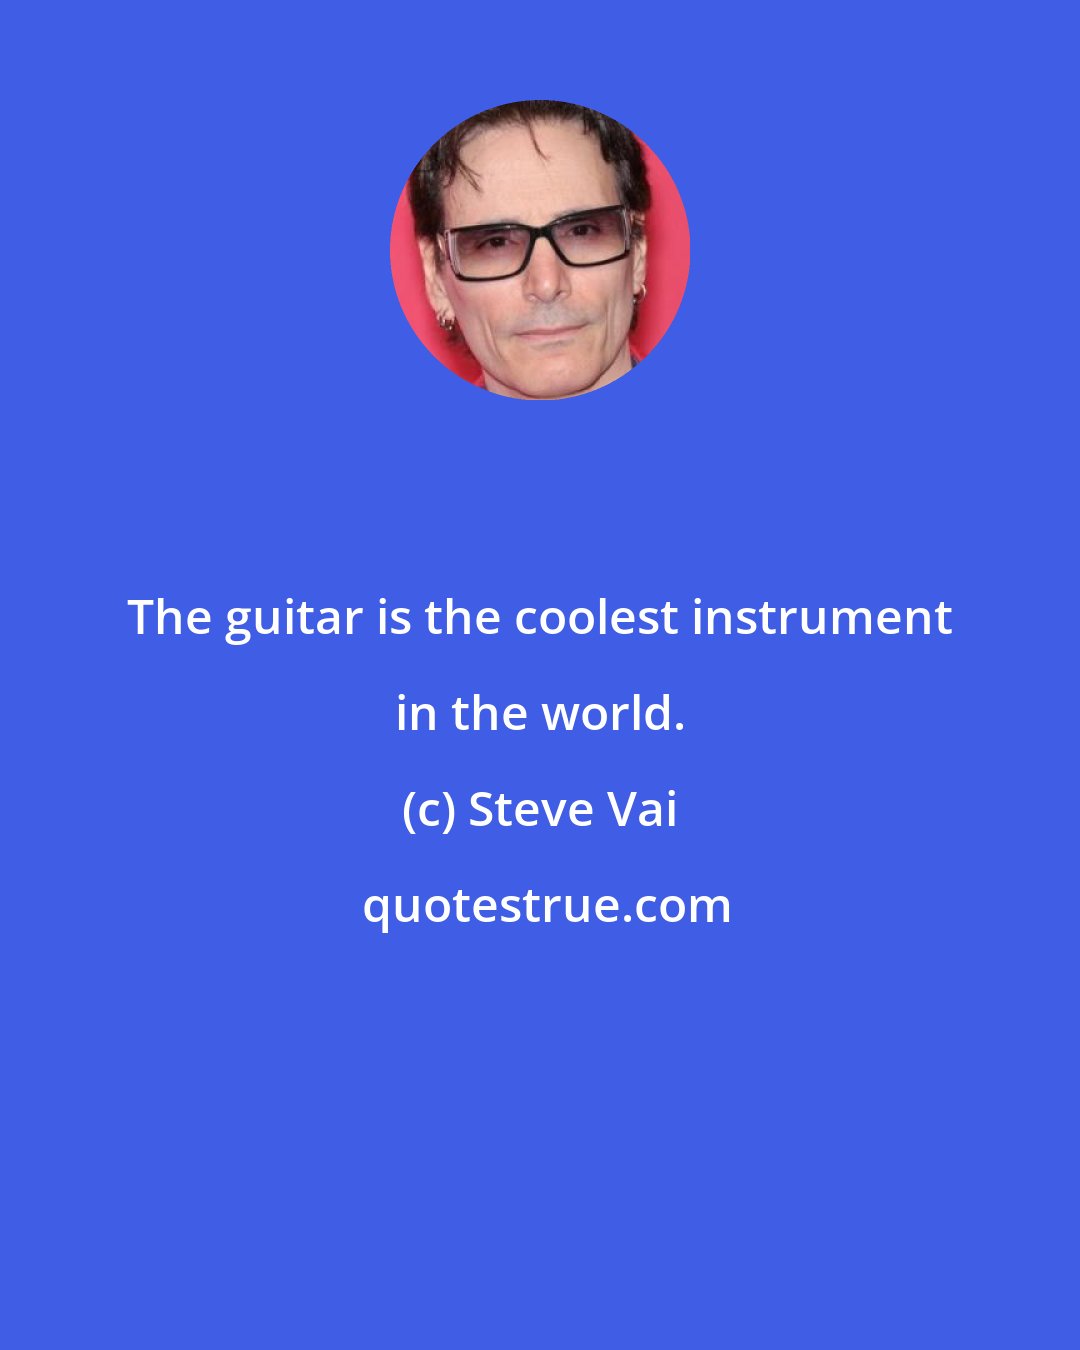 Steve Vai: The guitar is the coolest instrument in the world.